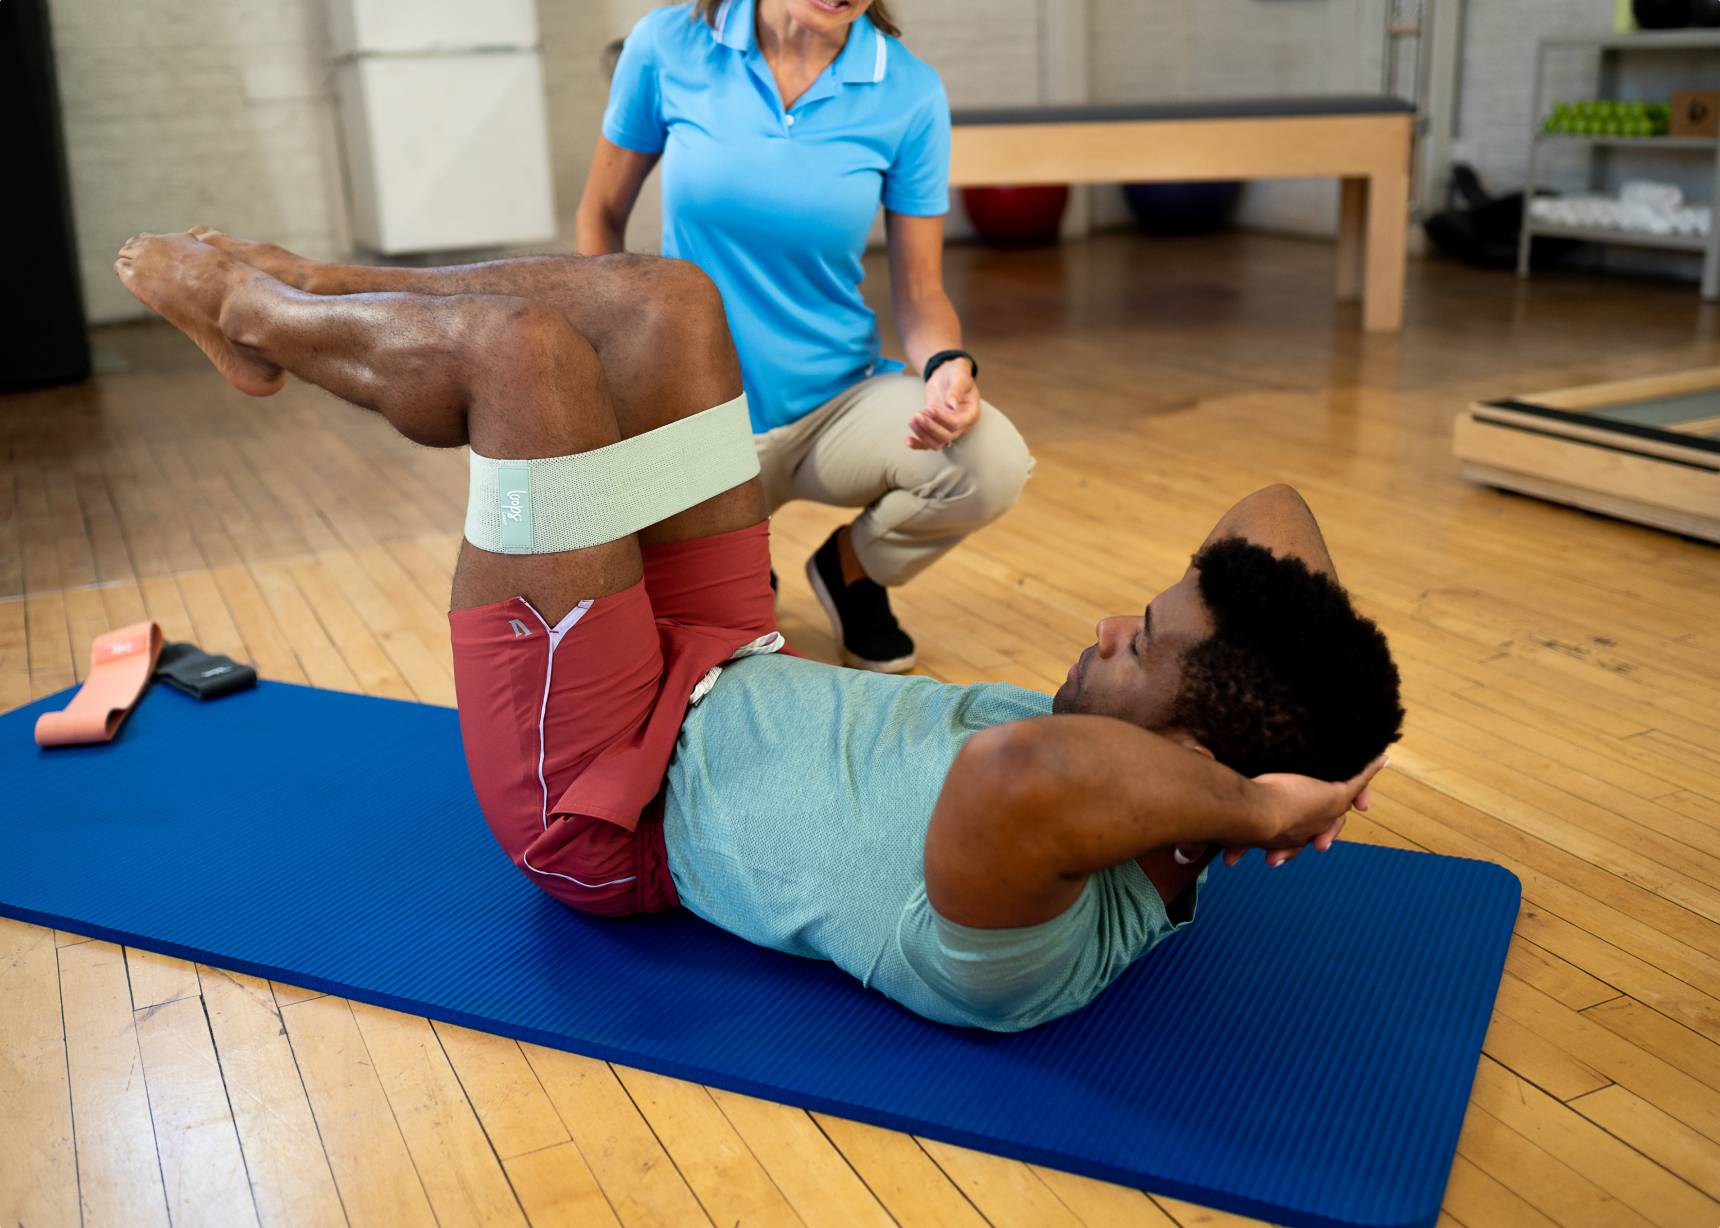 A man stretching his arms and torso using a resistance band on a blue exercise mat.